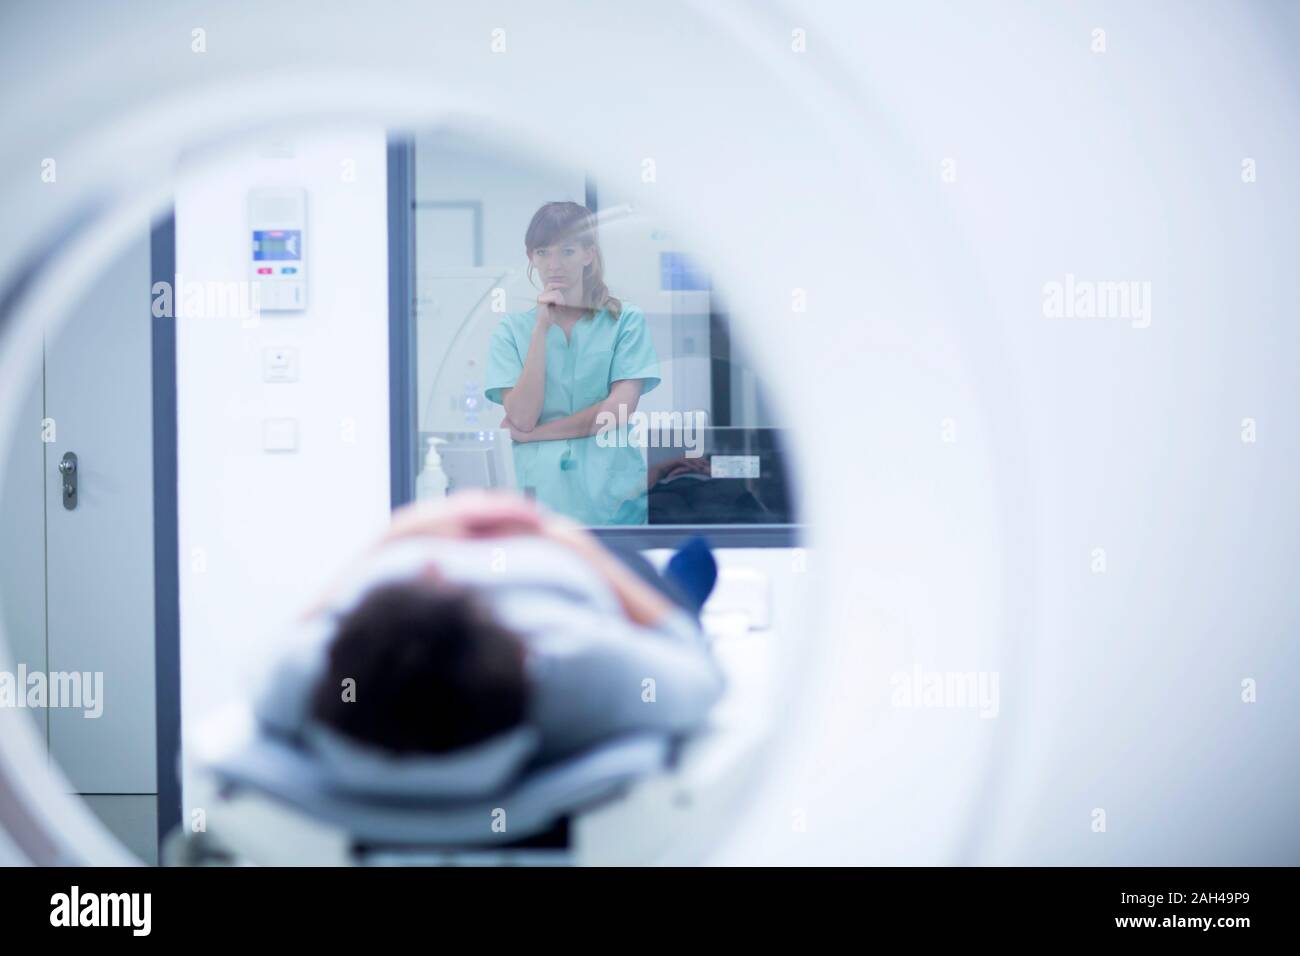 Patient in hospital during CT examination, female radiologist Stock Photo